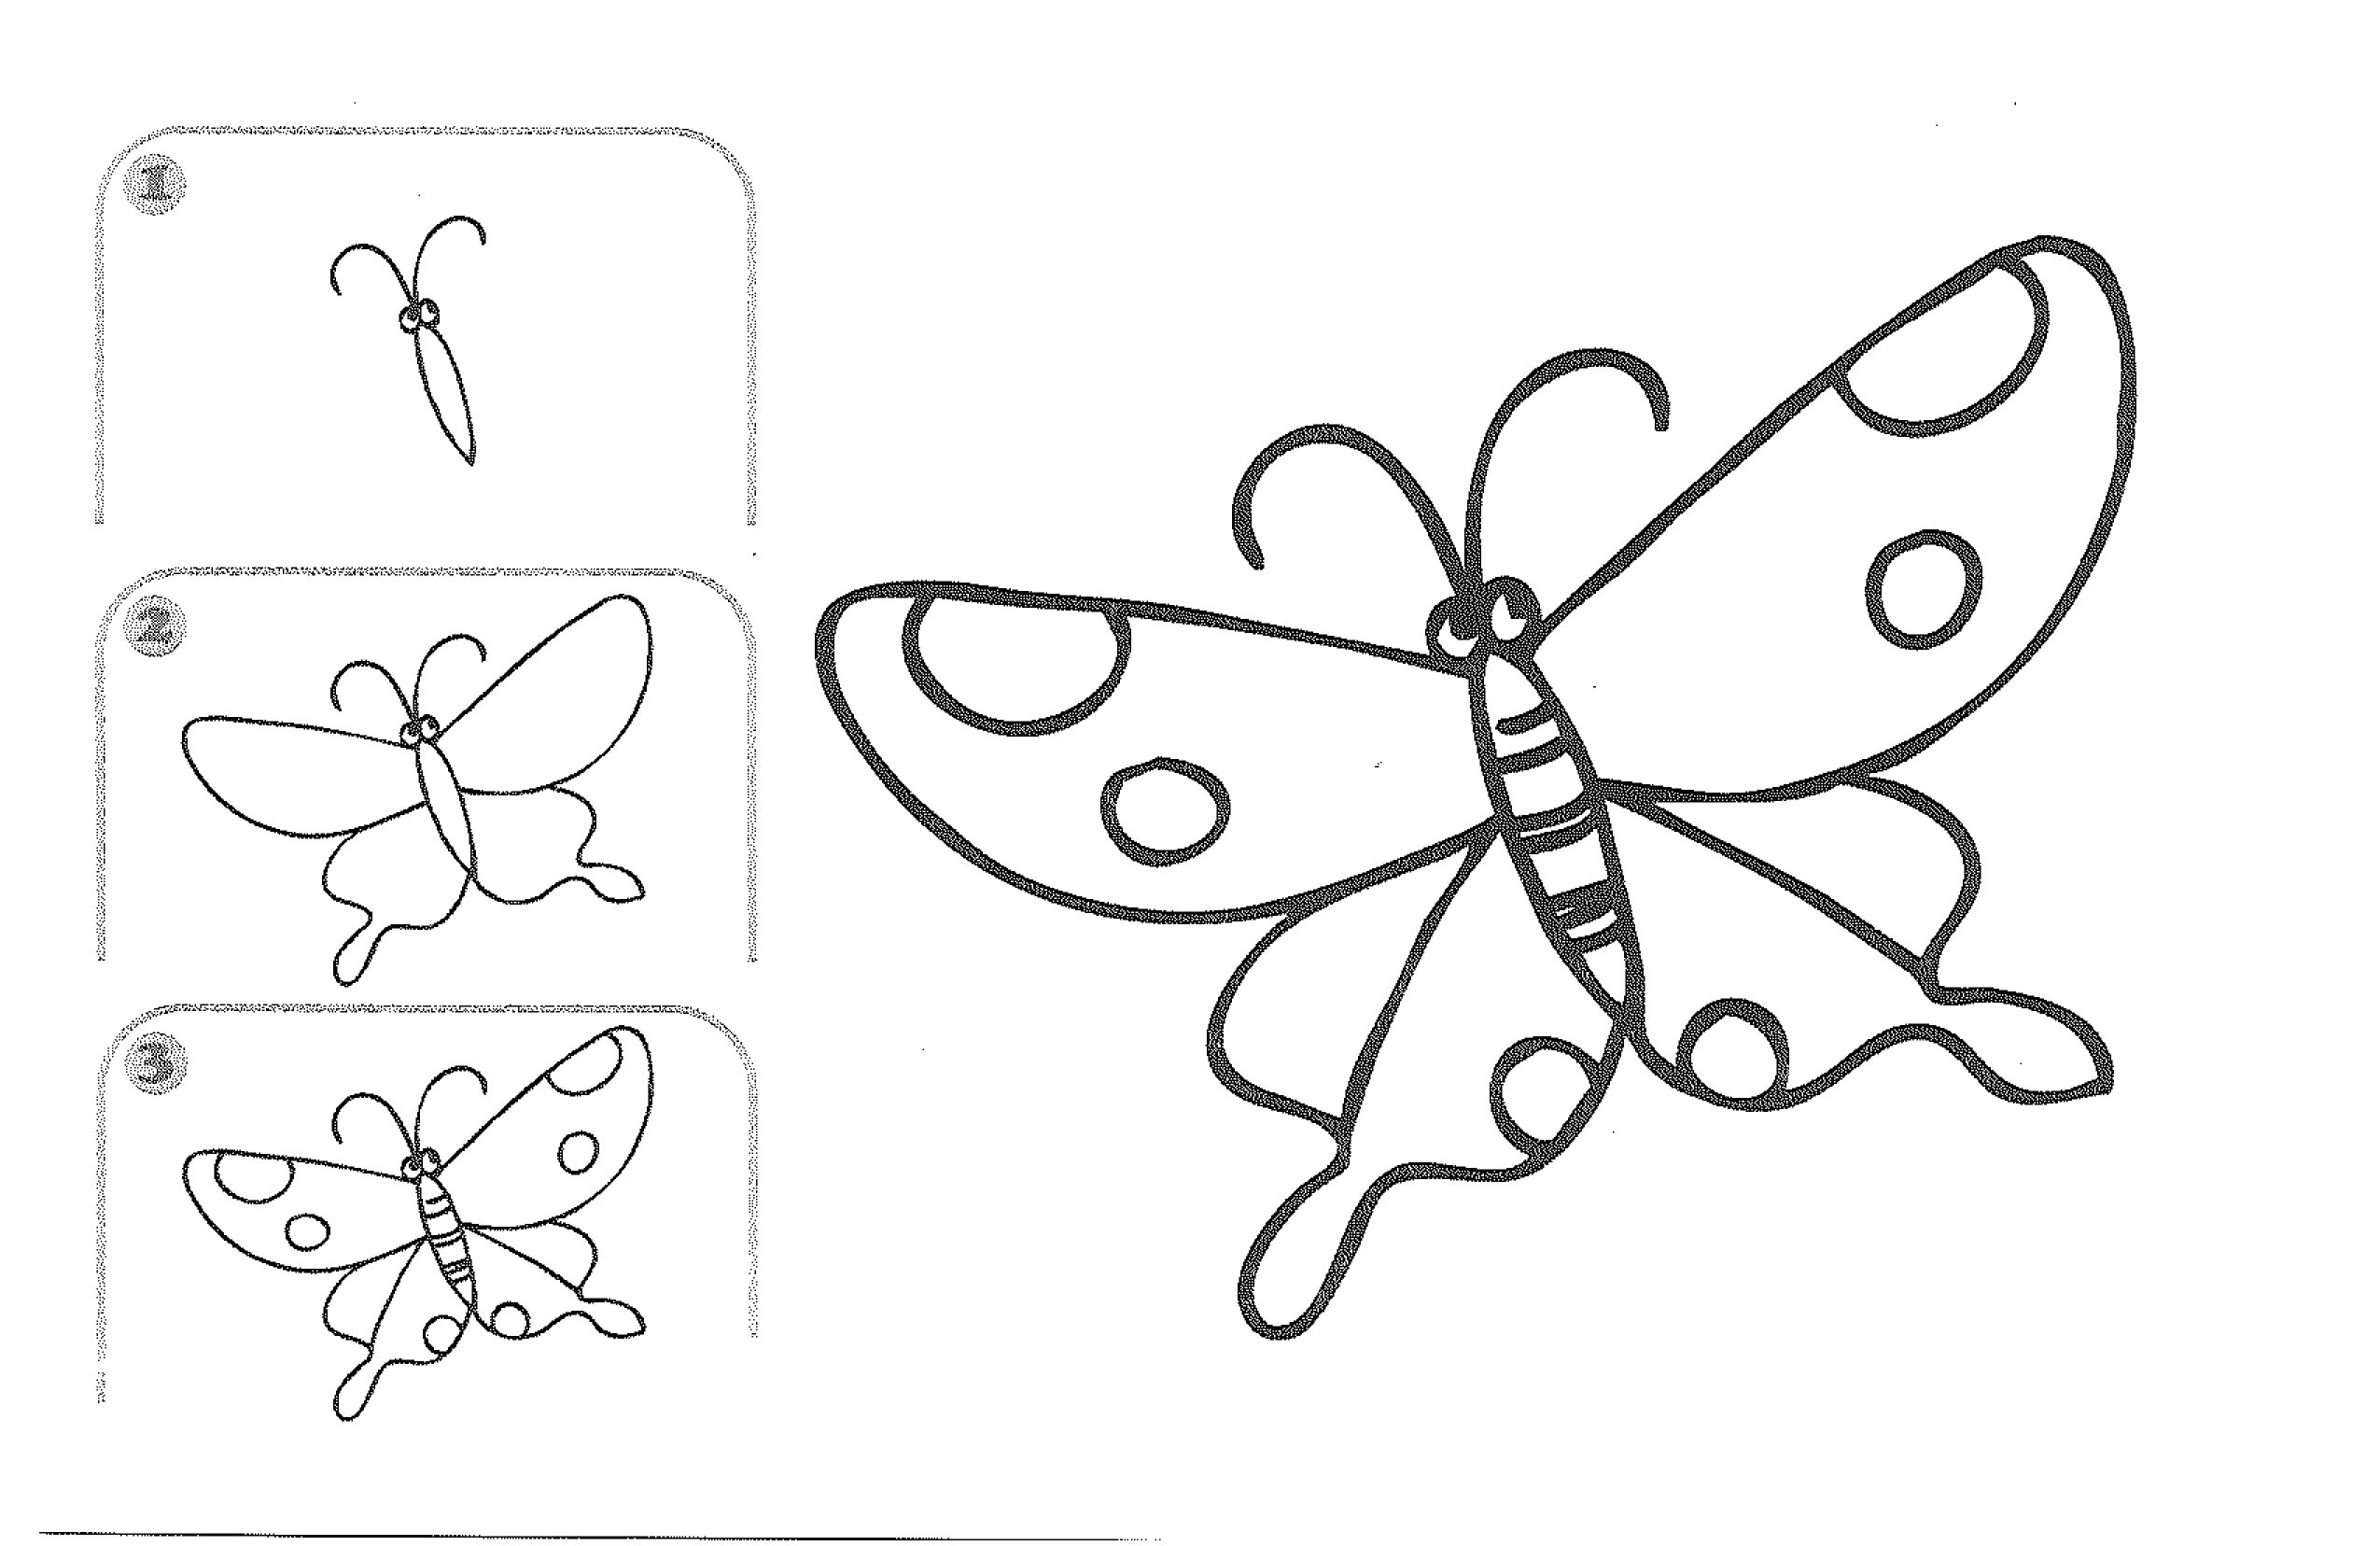 Free learn draw dragonfly page,free printable kids step by step drawing activities, coloring pages